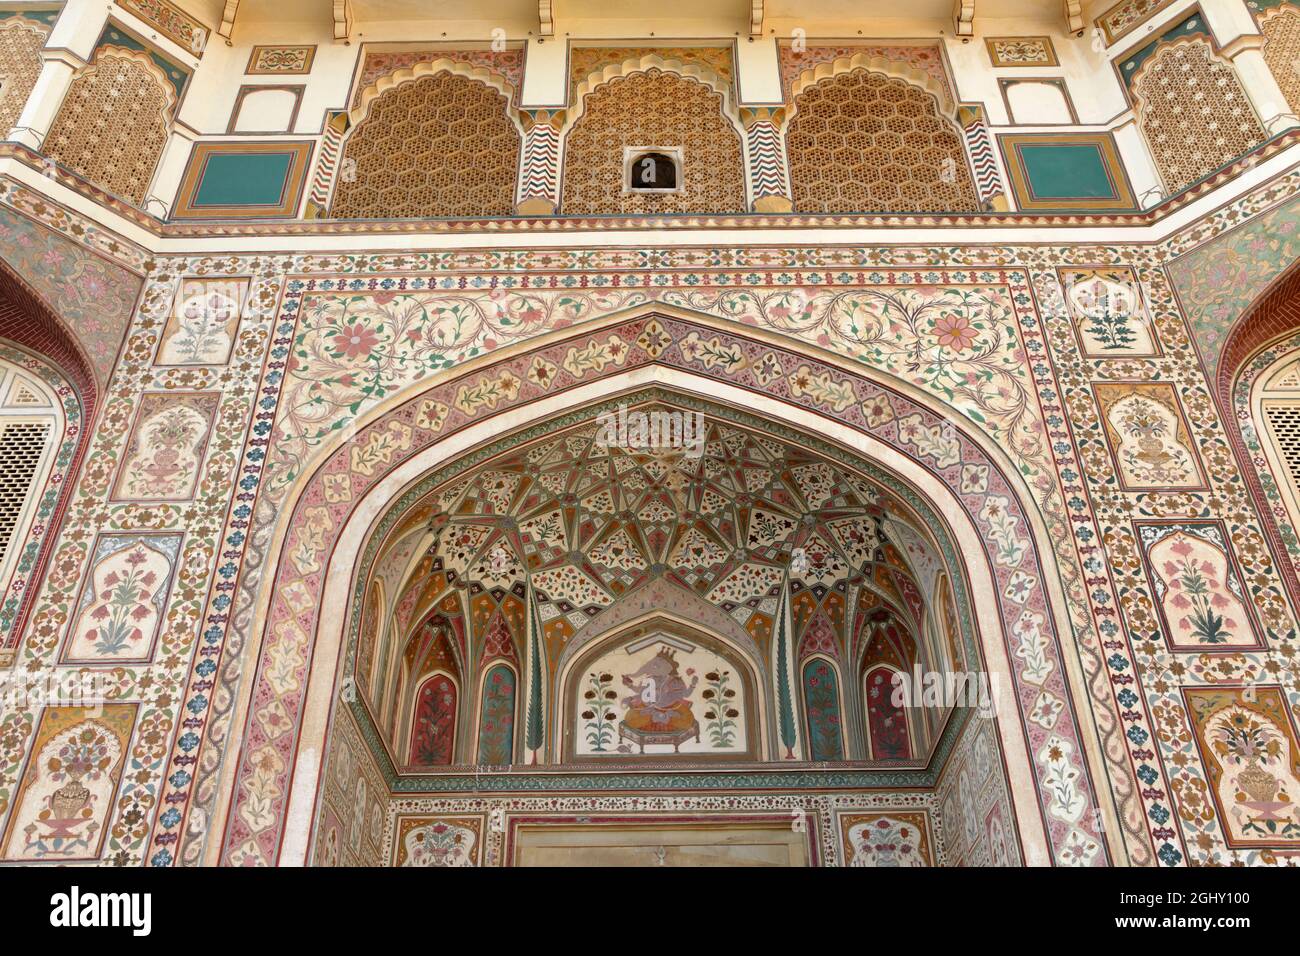 The decorations of Ganesh Pol at Amber Fort, Jaipur, India. Stock Photo